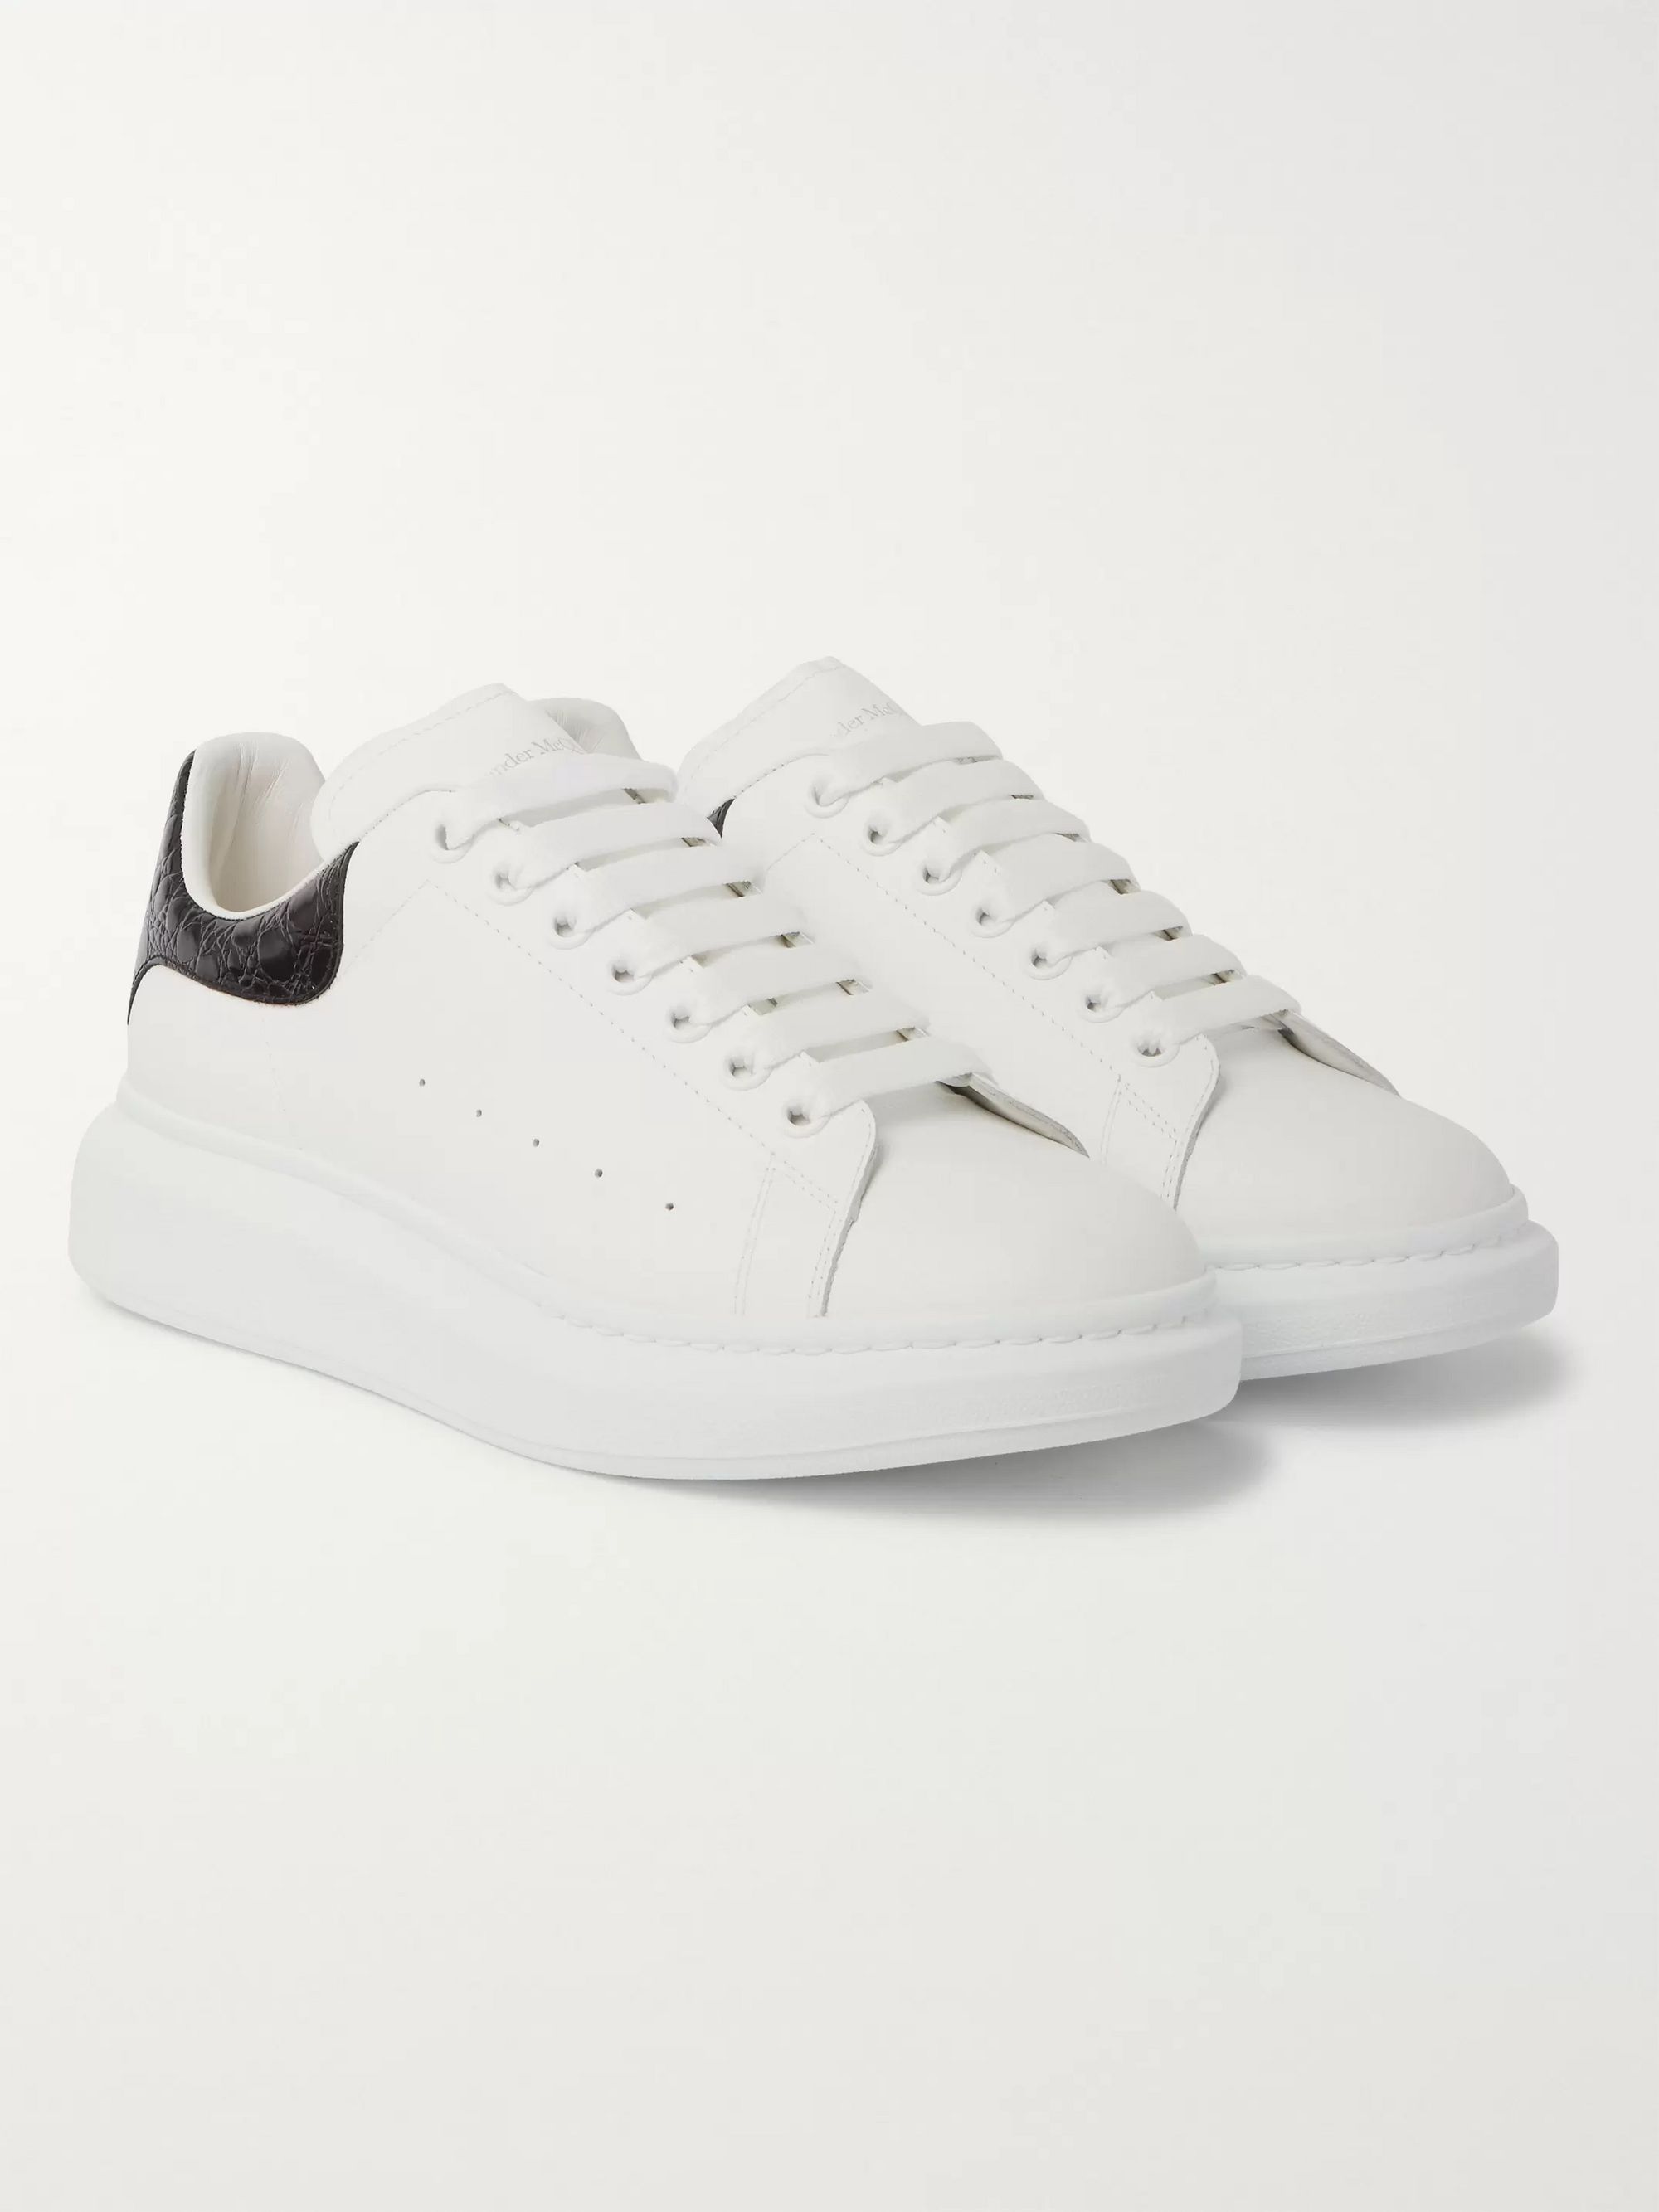 alexander mcqueen trainers white and gold